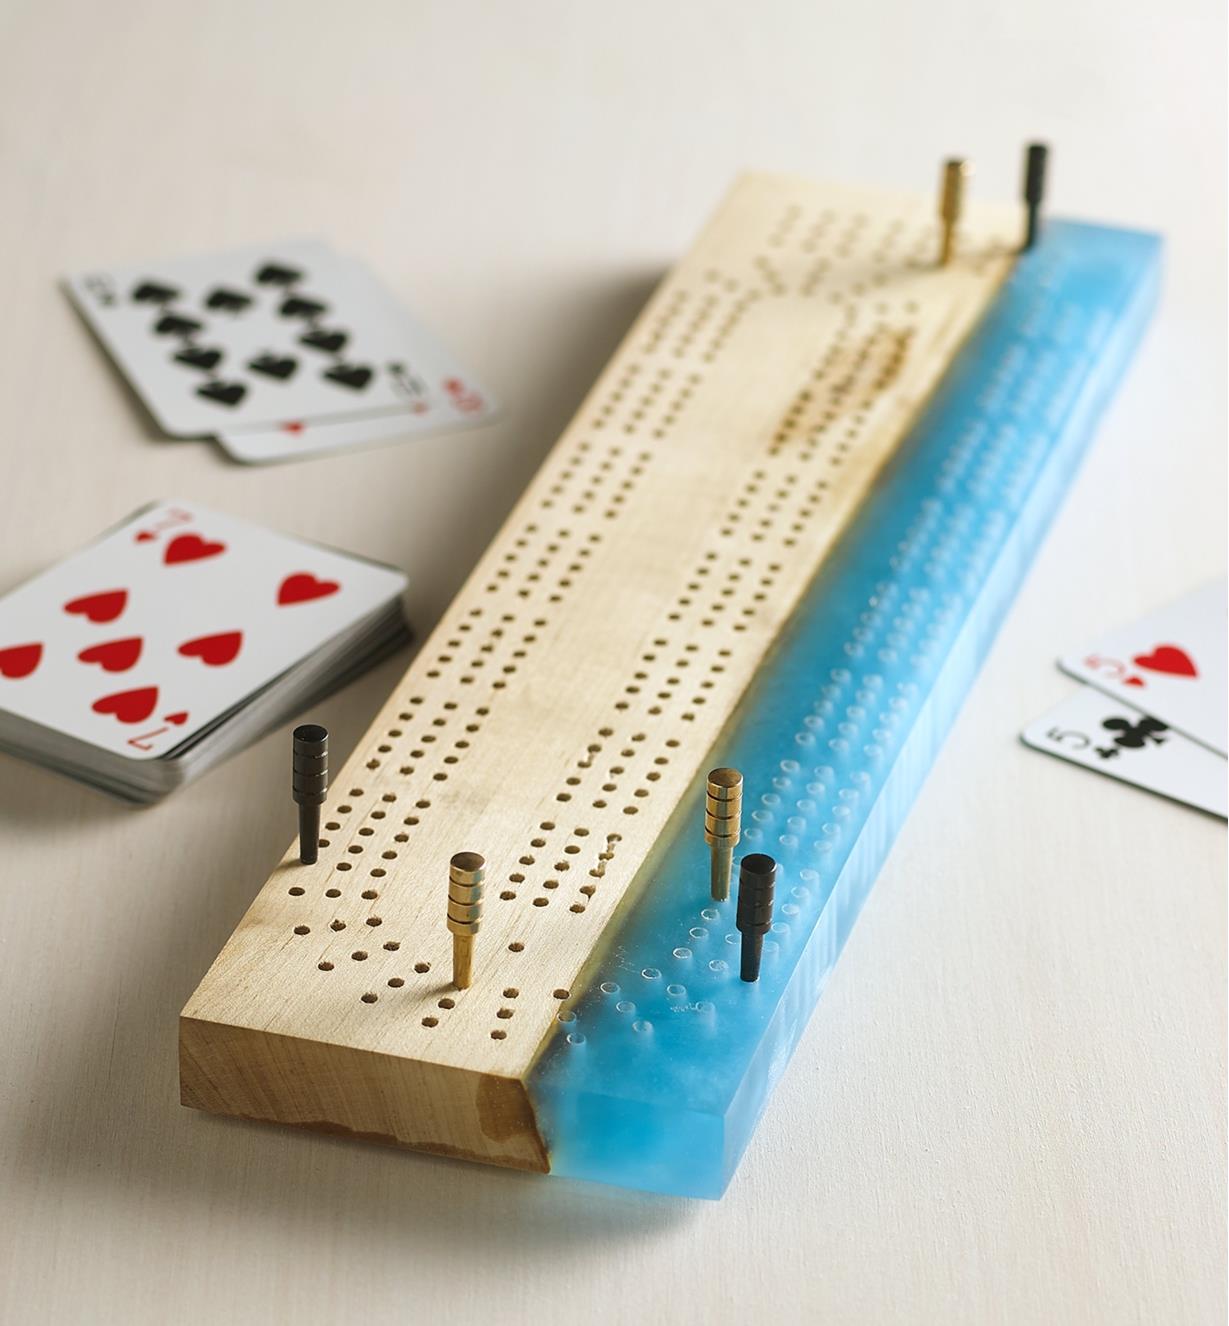 A game of cribbage in progress